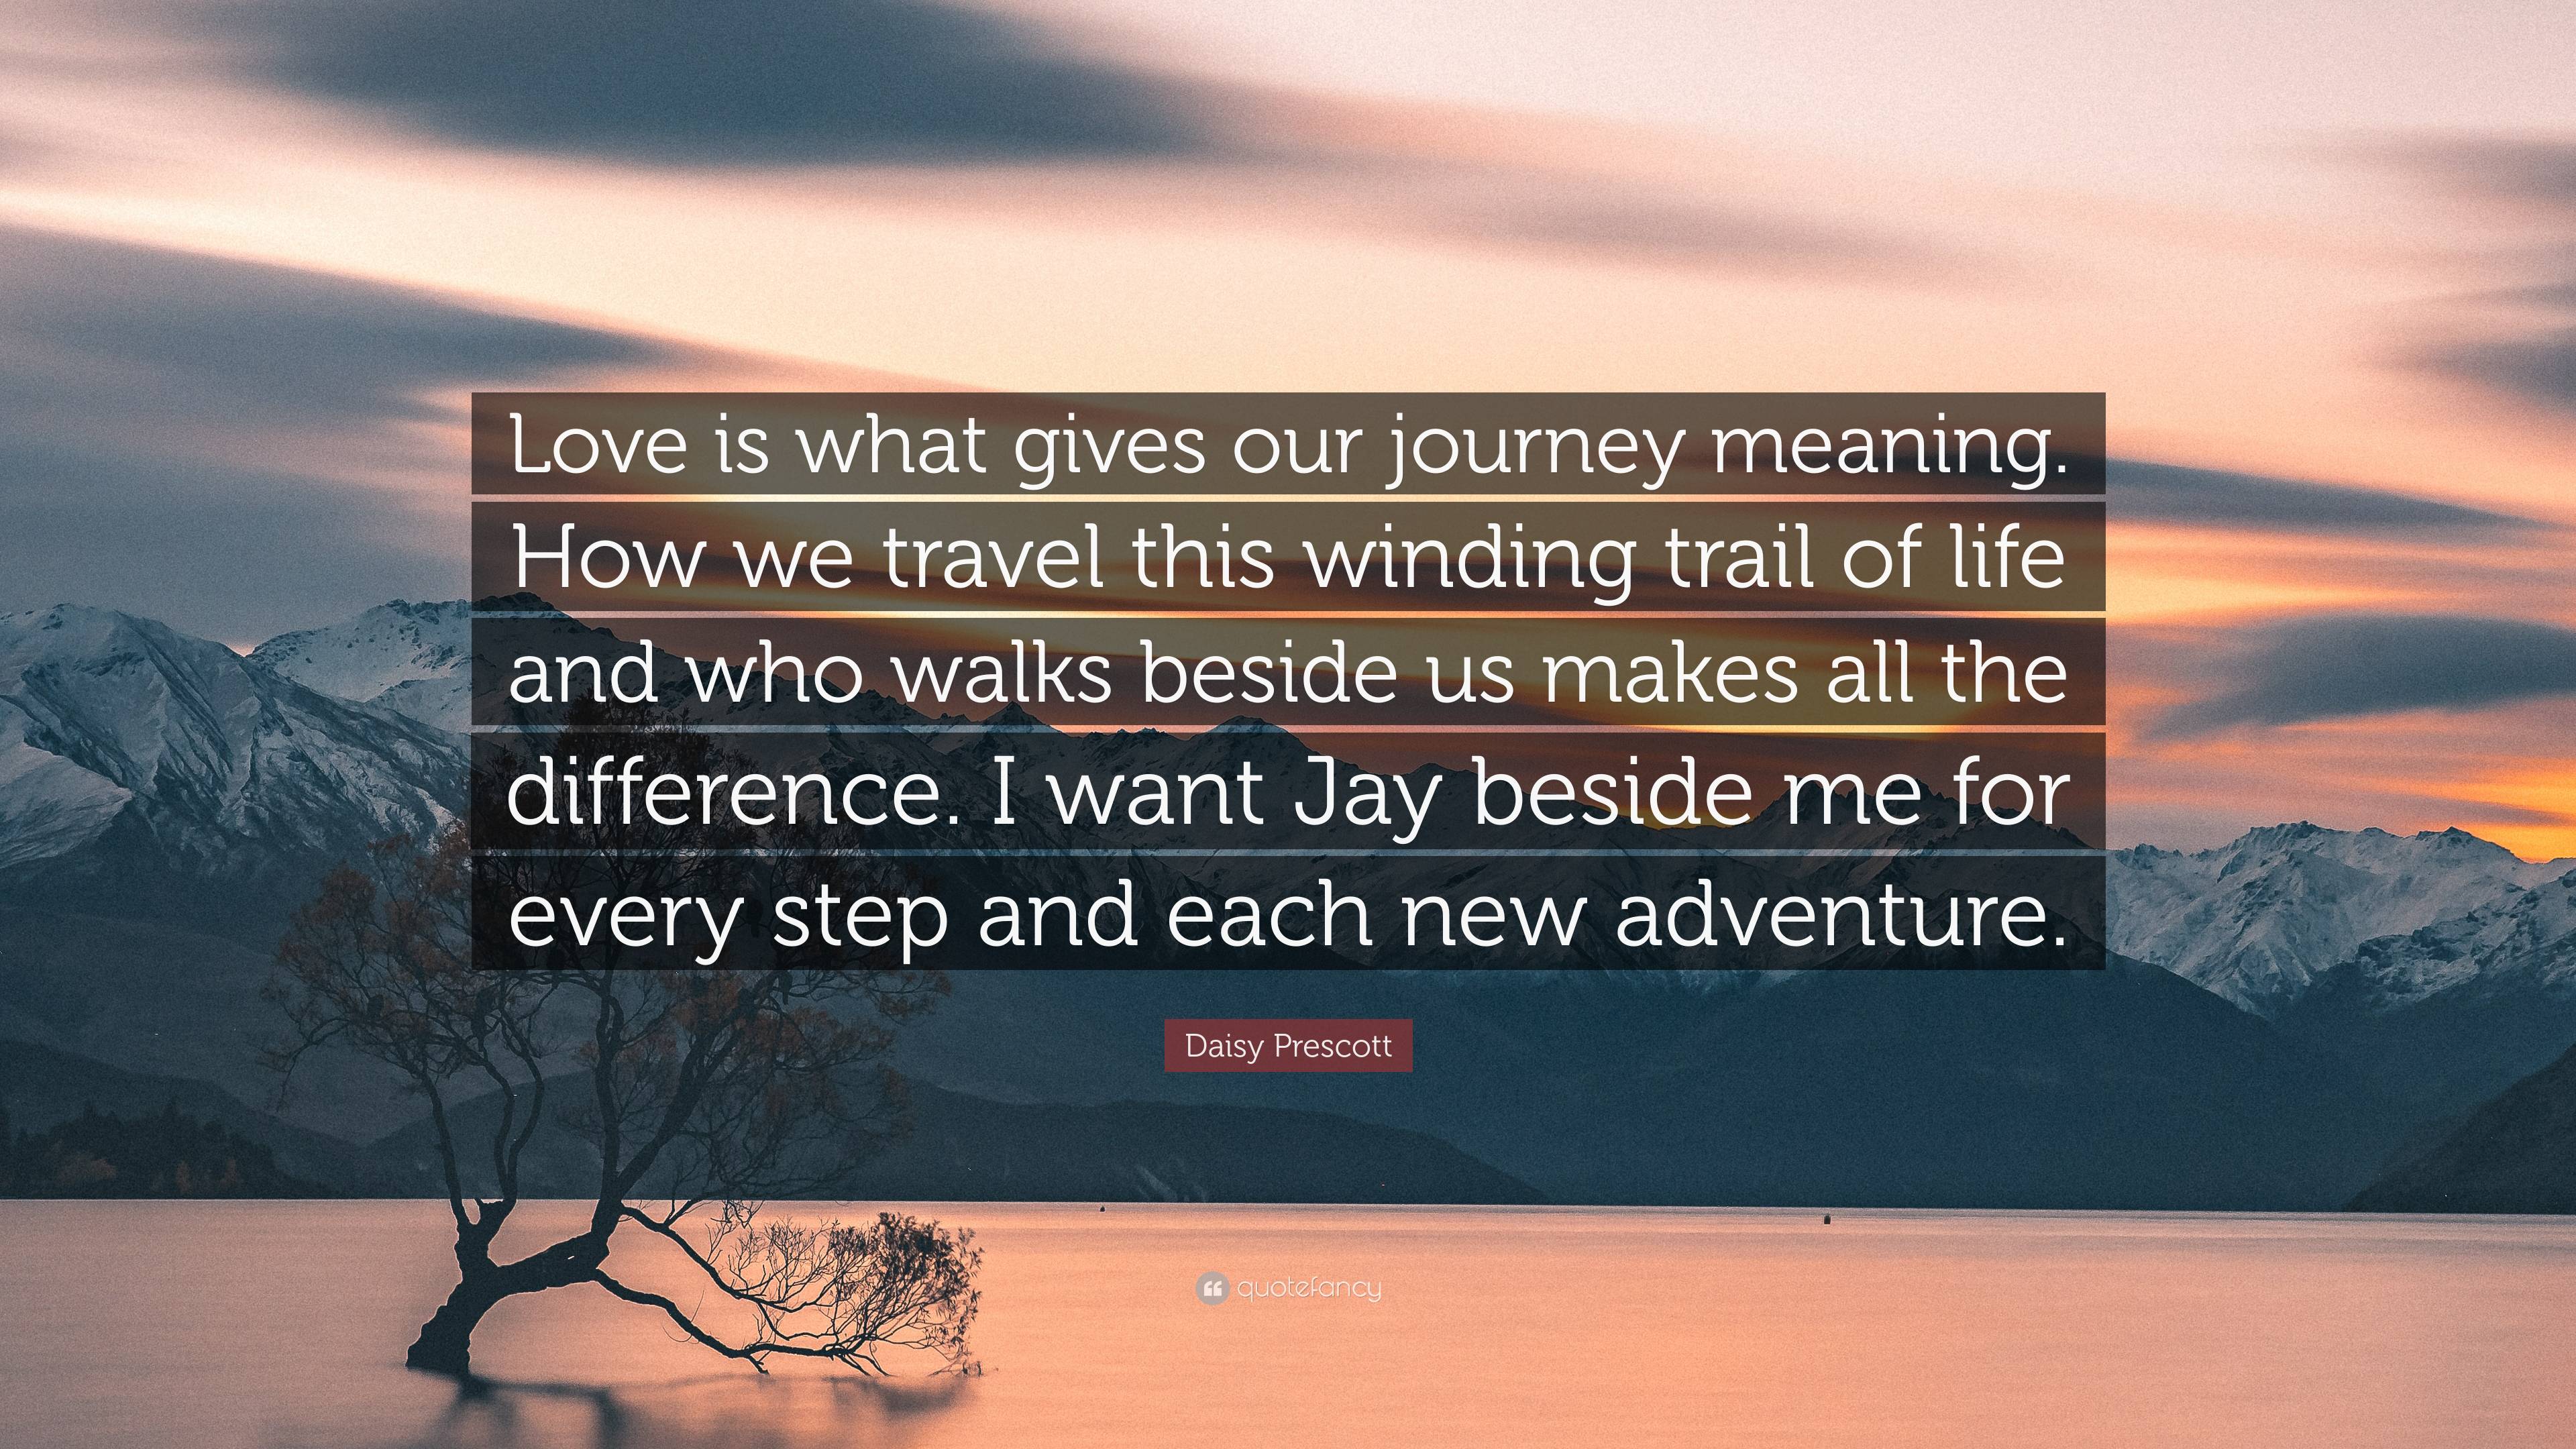 difference journey meaning